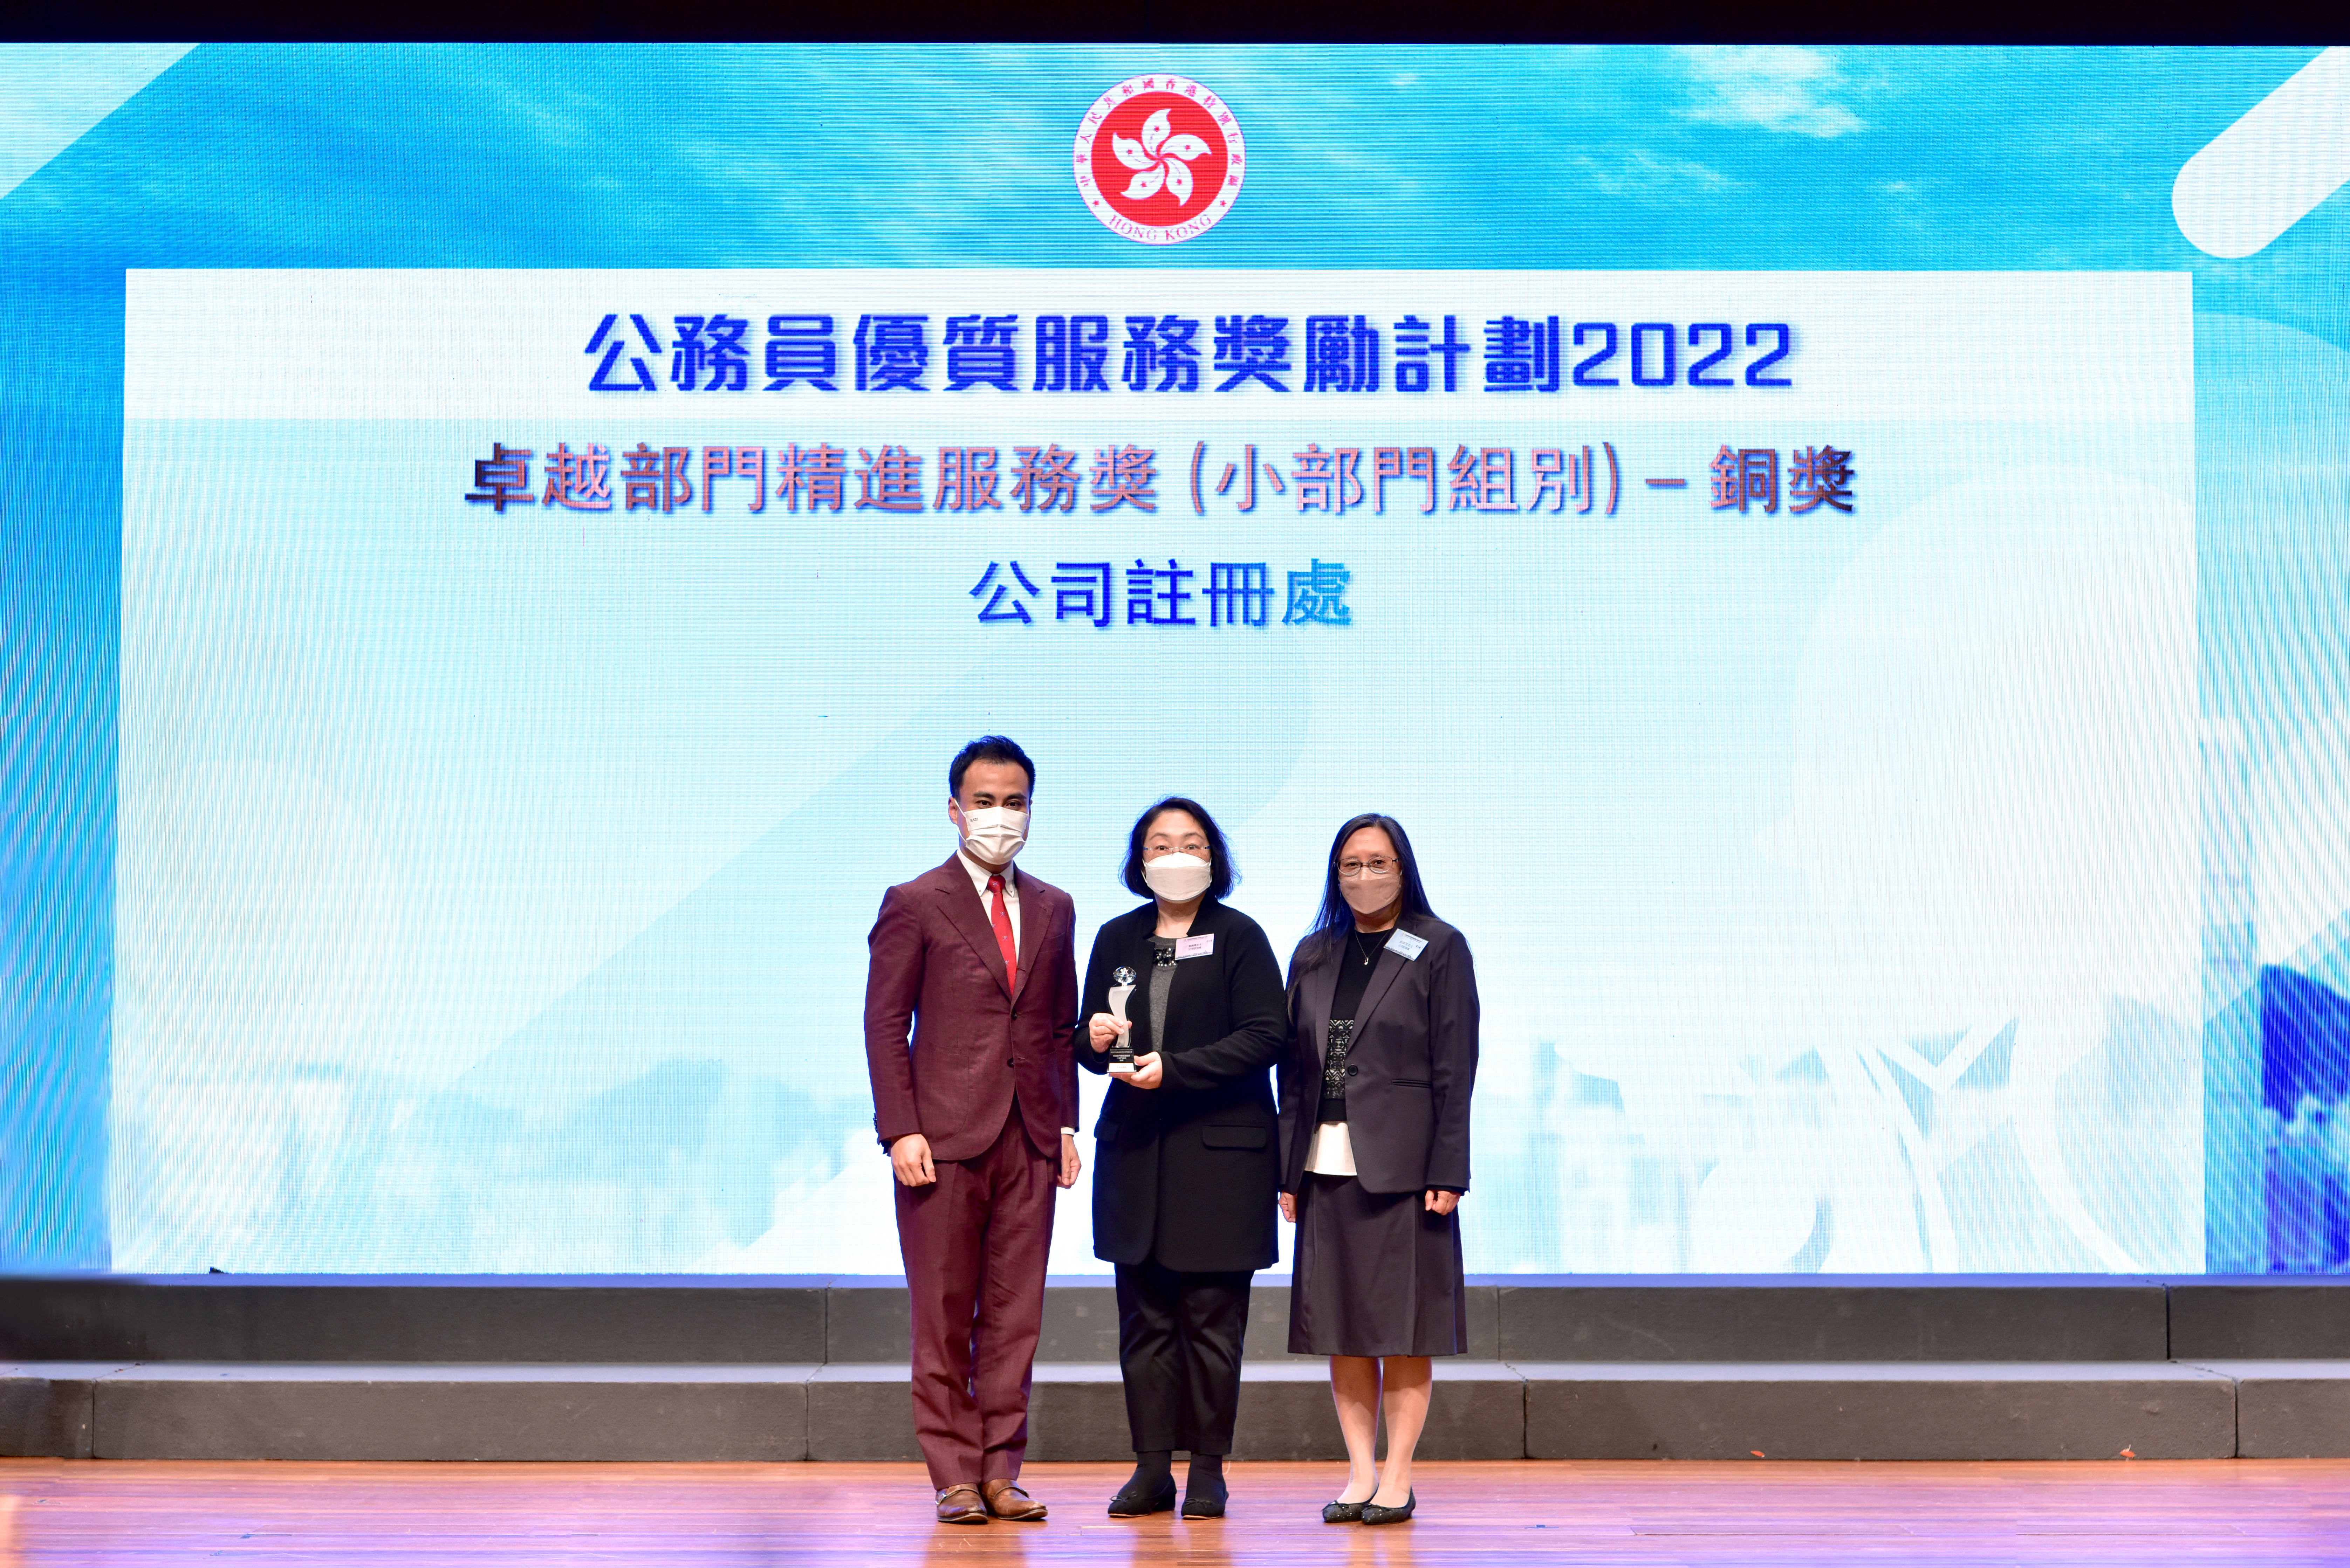 Miss Helen Tang, Registrar of Companies (centre), accompanied by Ms Marianna Yu, Registry Manager (right), received the Bronze Prize of the Excellence in Service Enhancement Award (Small Department Category) at the Prize Presentation Ceremony.